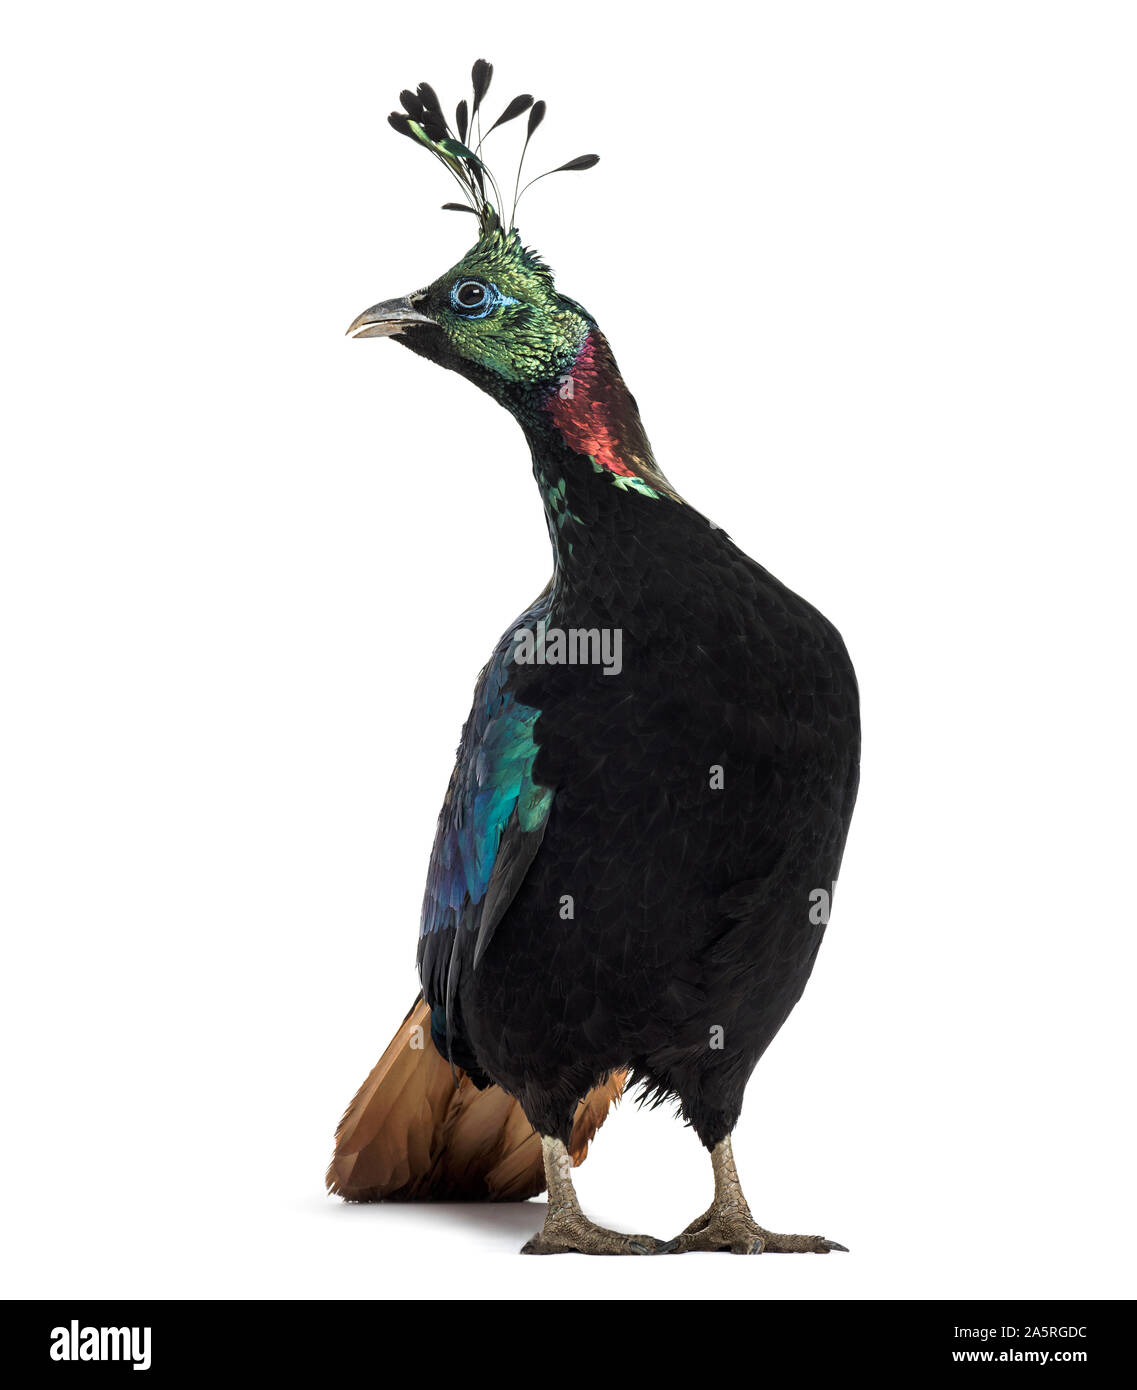 Himalayan monal, Lophophorus impejanus, also known as the Impeyan monal and Impeyan pheasant standing against white background Stock Photo